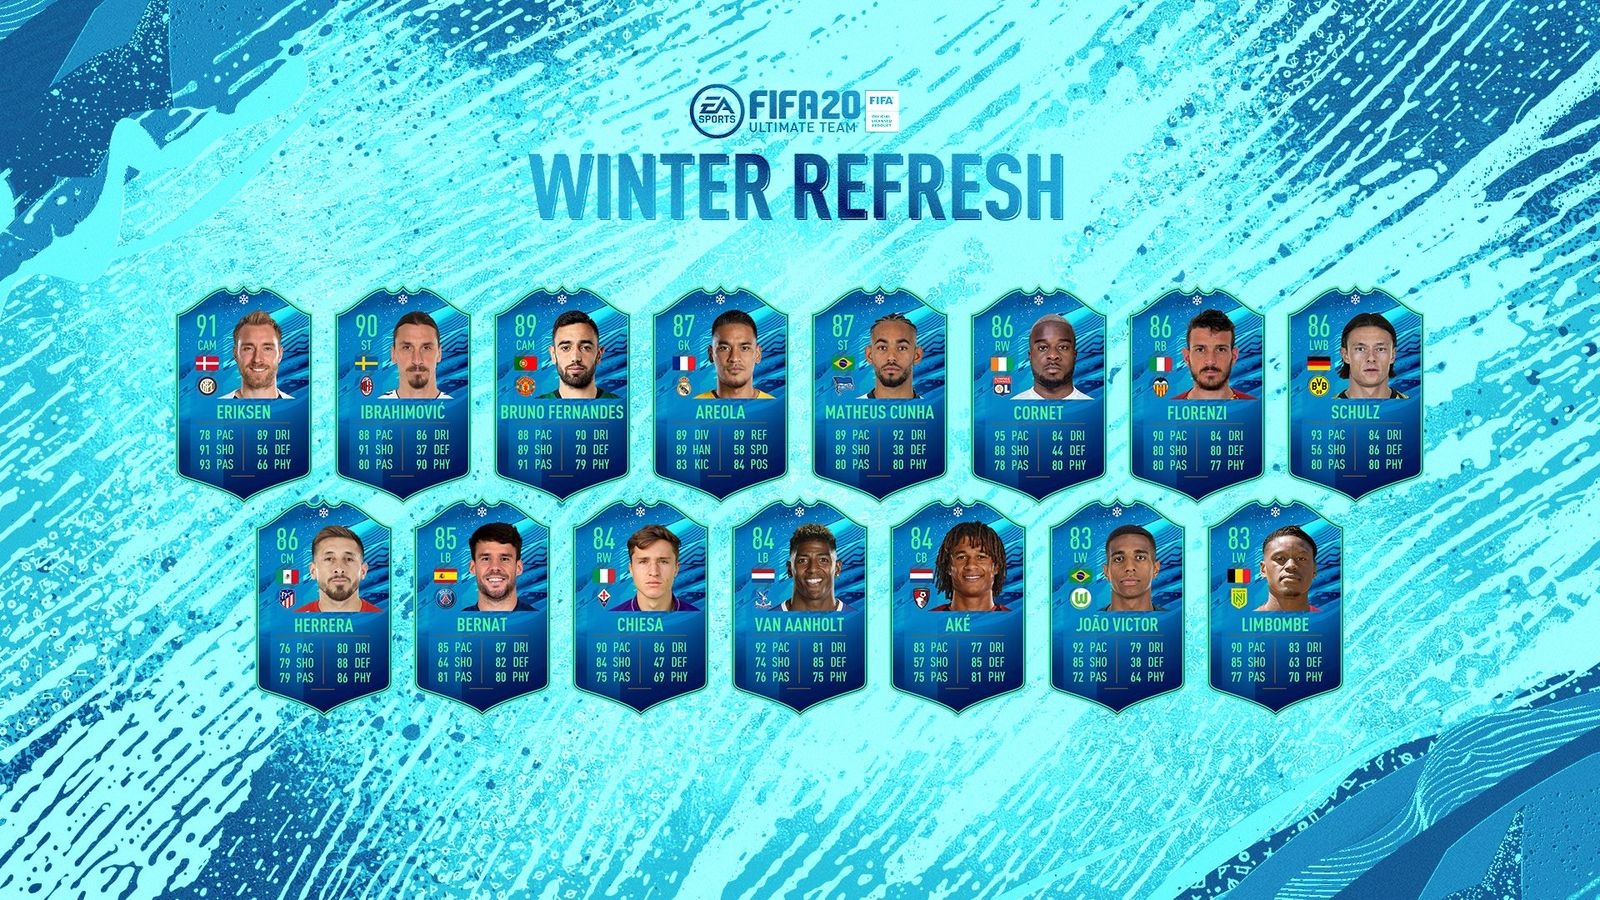 WINTER REFRESH: FIFA 20's promo didn't disappoint!